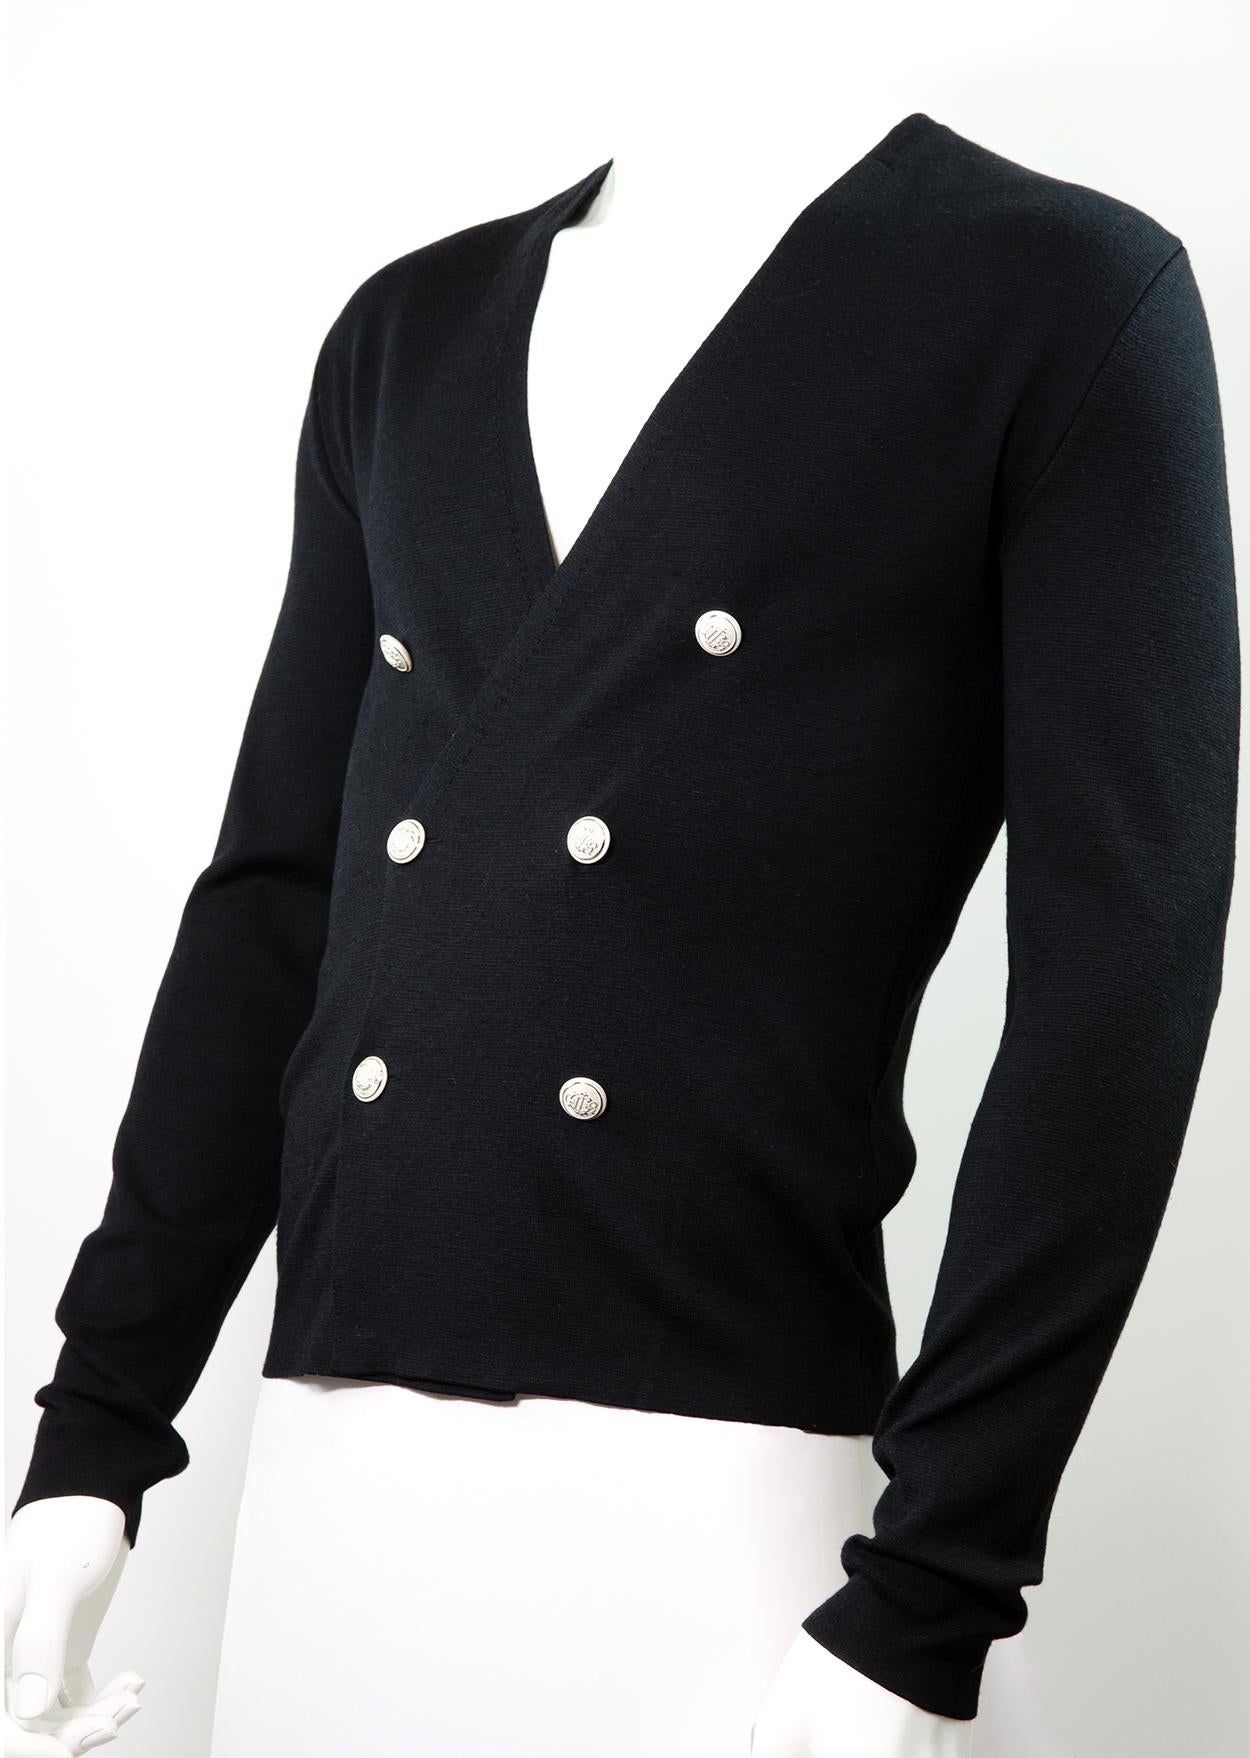 Dior Homme by Kris Van Assche F/W2013 Double-breasted Cardigan

Brand: Dior Homme

Designer: Kris Van Assche

Collection / Year: F/W 2013

Fabric: Wool / Silk

Color: Black with white buttons

Size: S

Elevated and comfortable, this Dior cardigan is